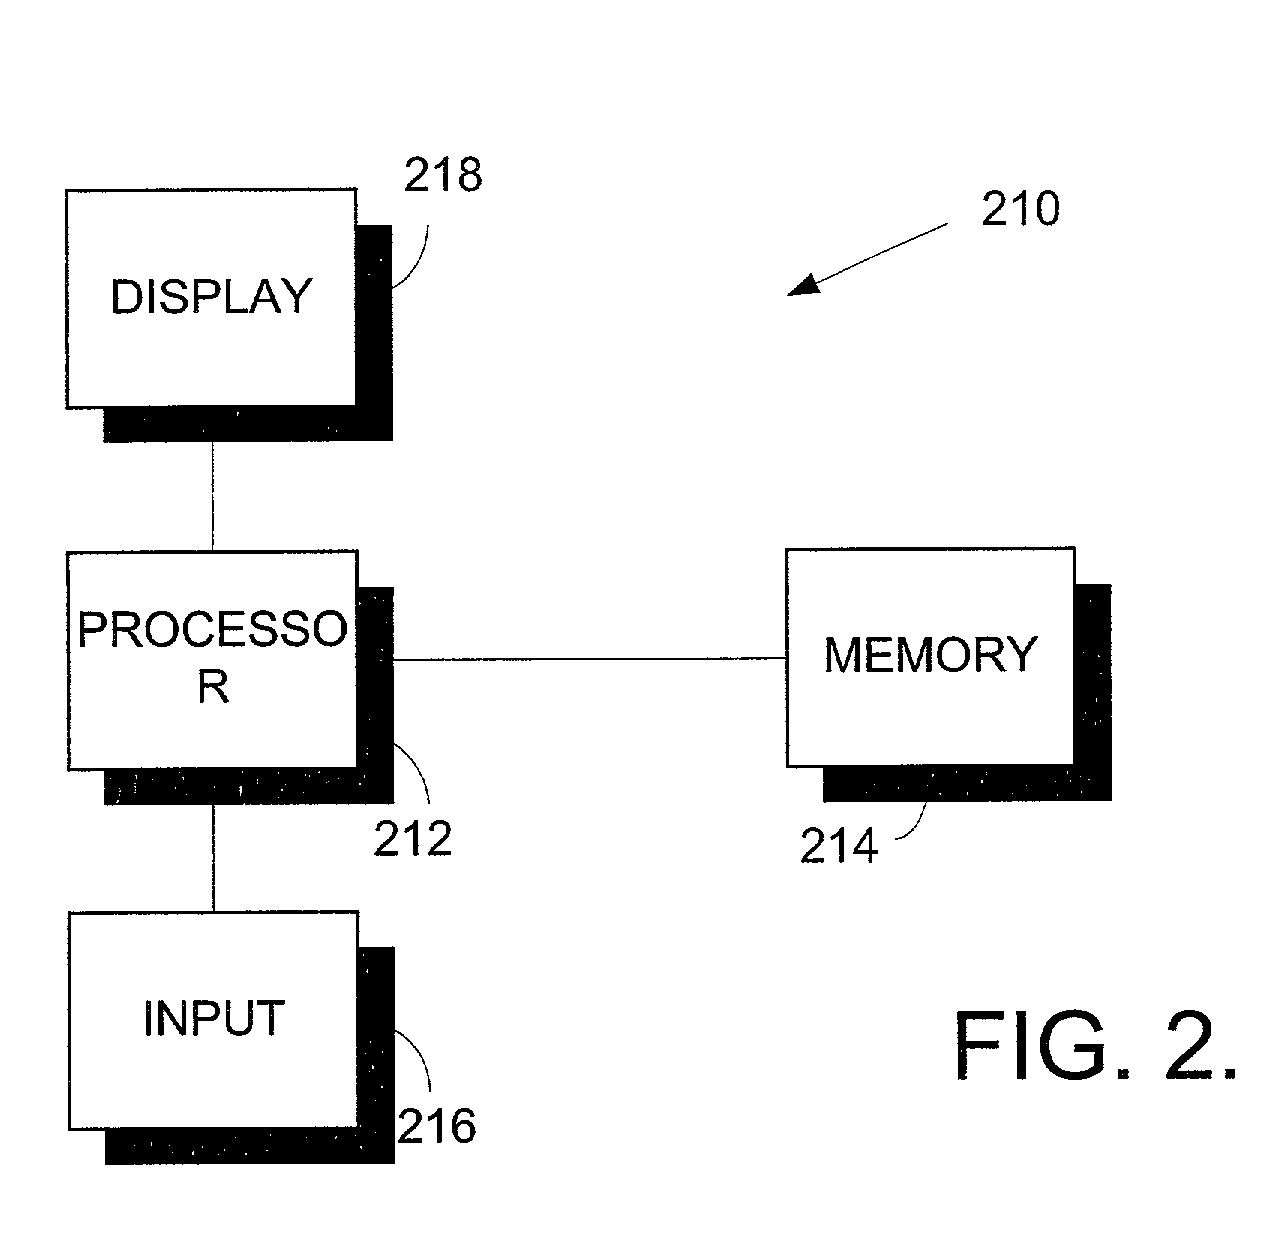 Method and system for separating business and device logic in a computing network system